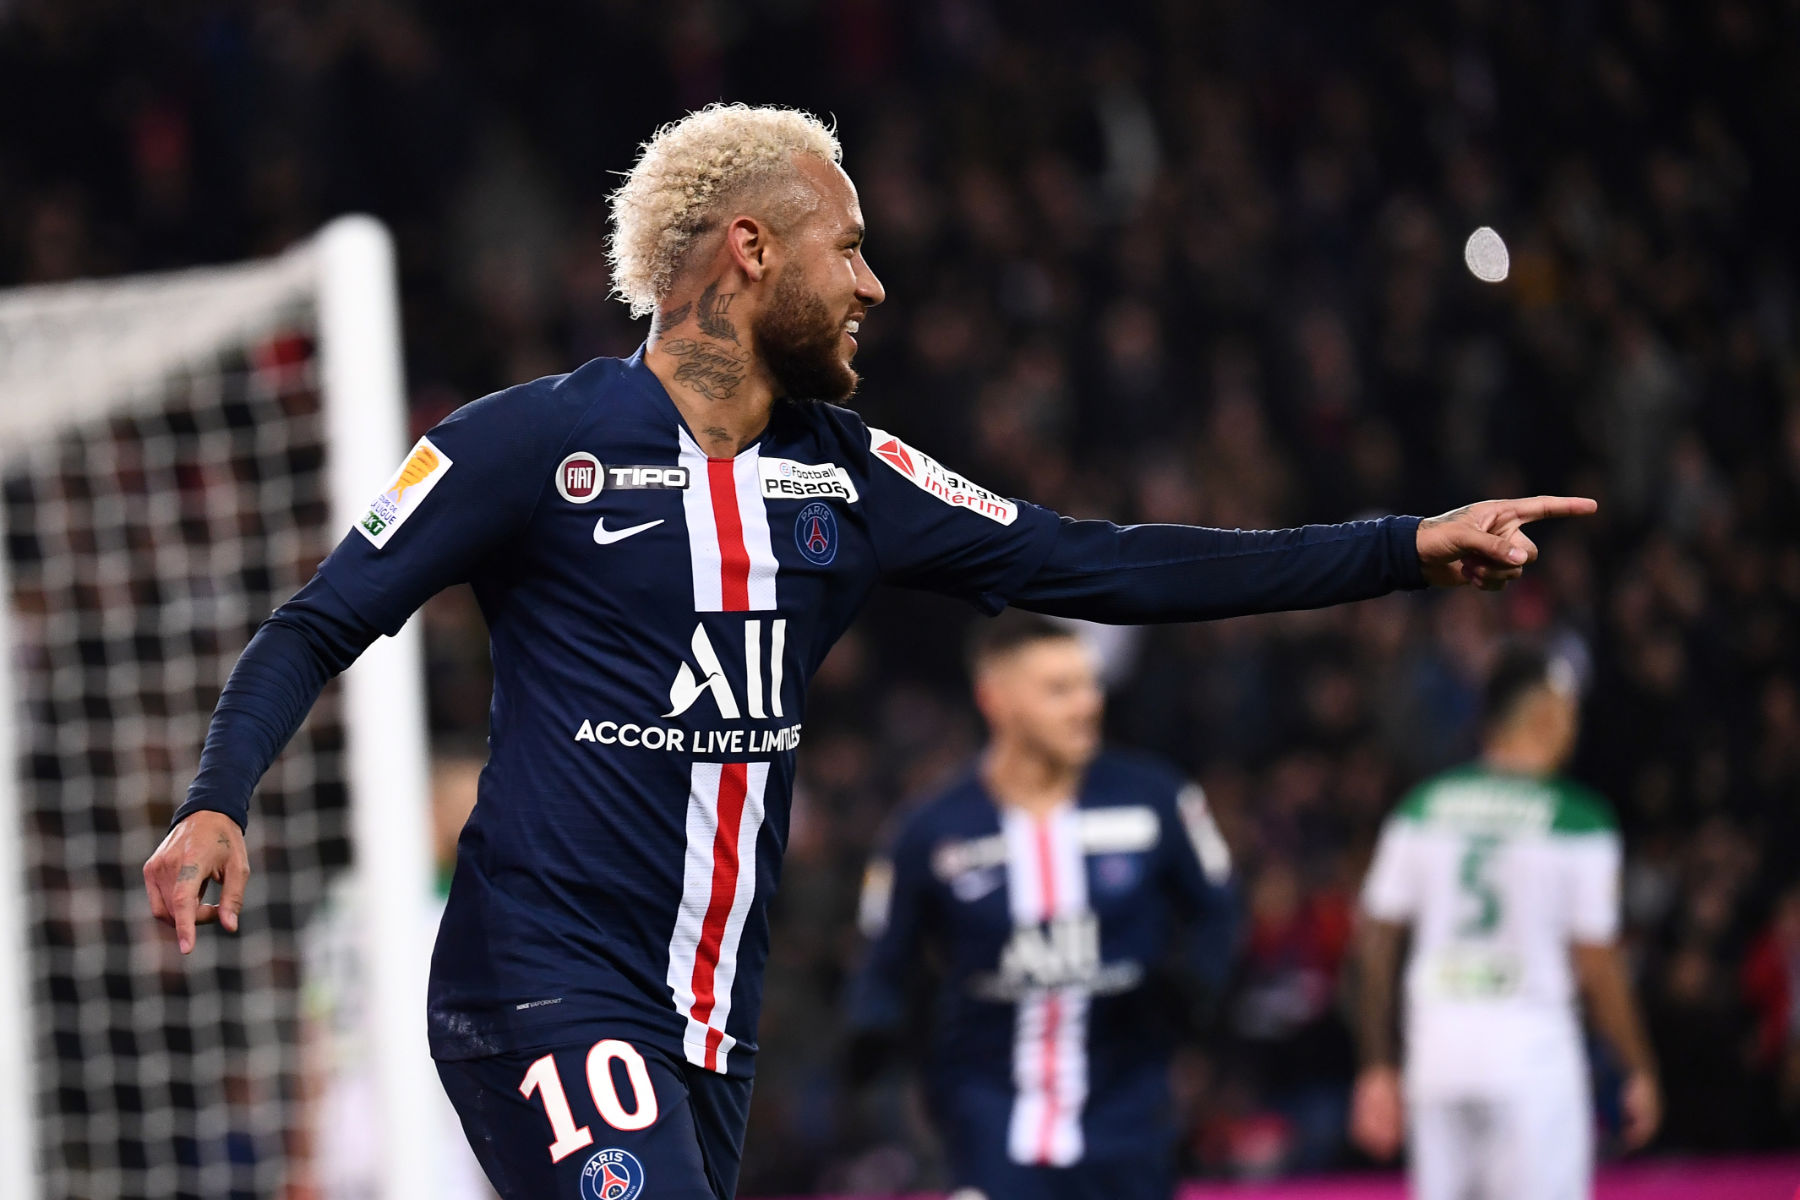 'There is immense affection and great respect': Neymar insists he has great relationship with PSG fans despite angling for Barcelona return - Bóng Đá